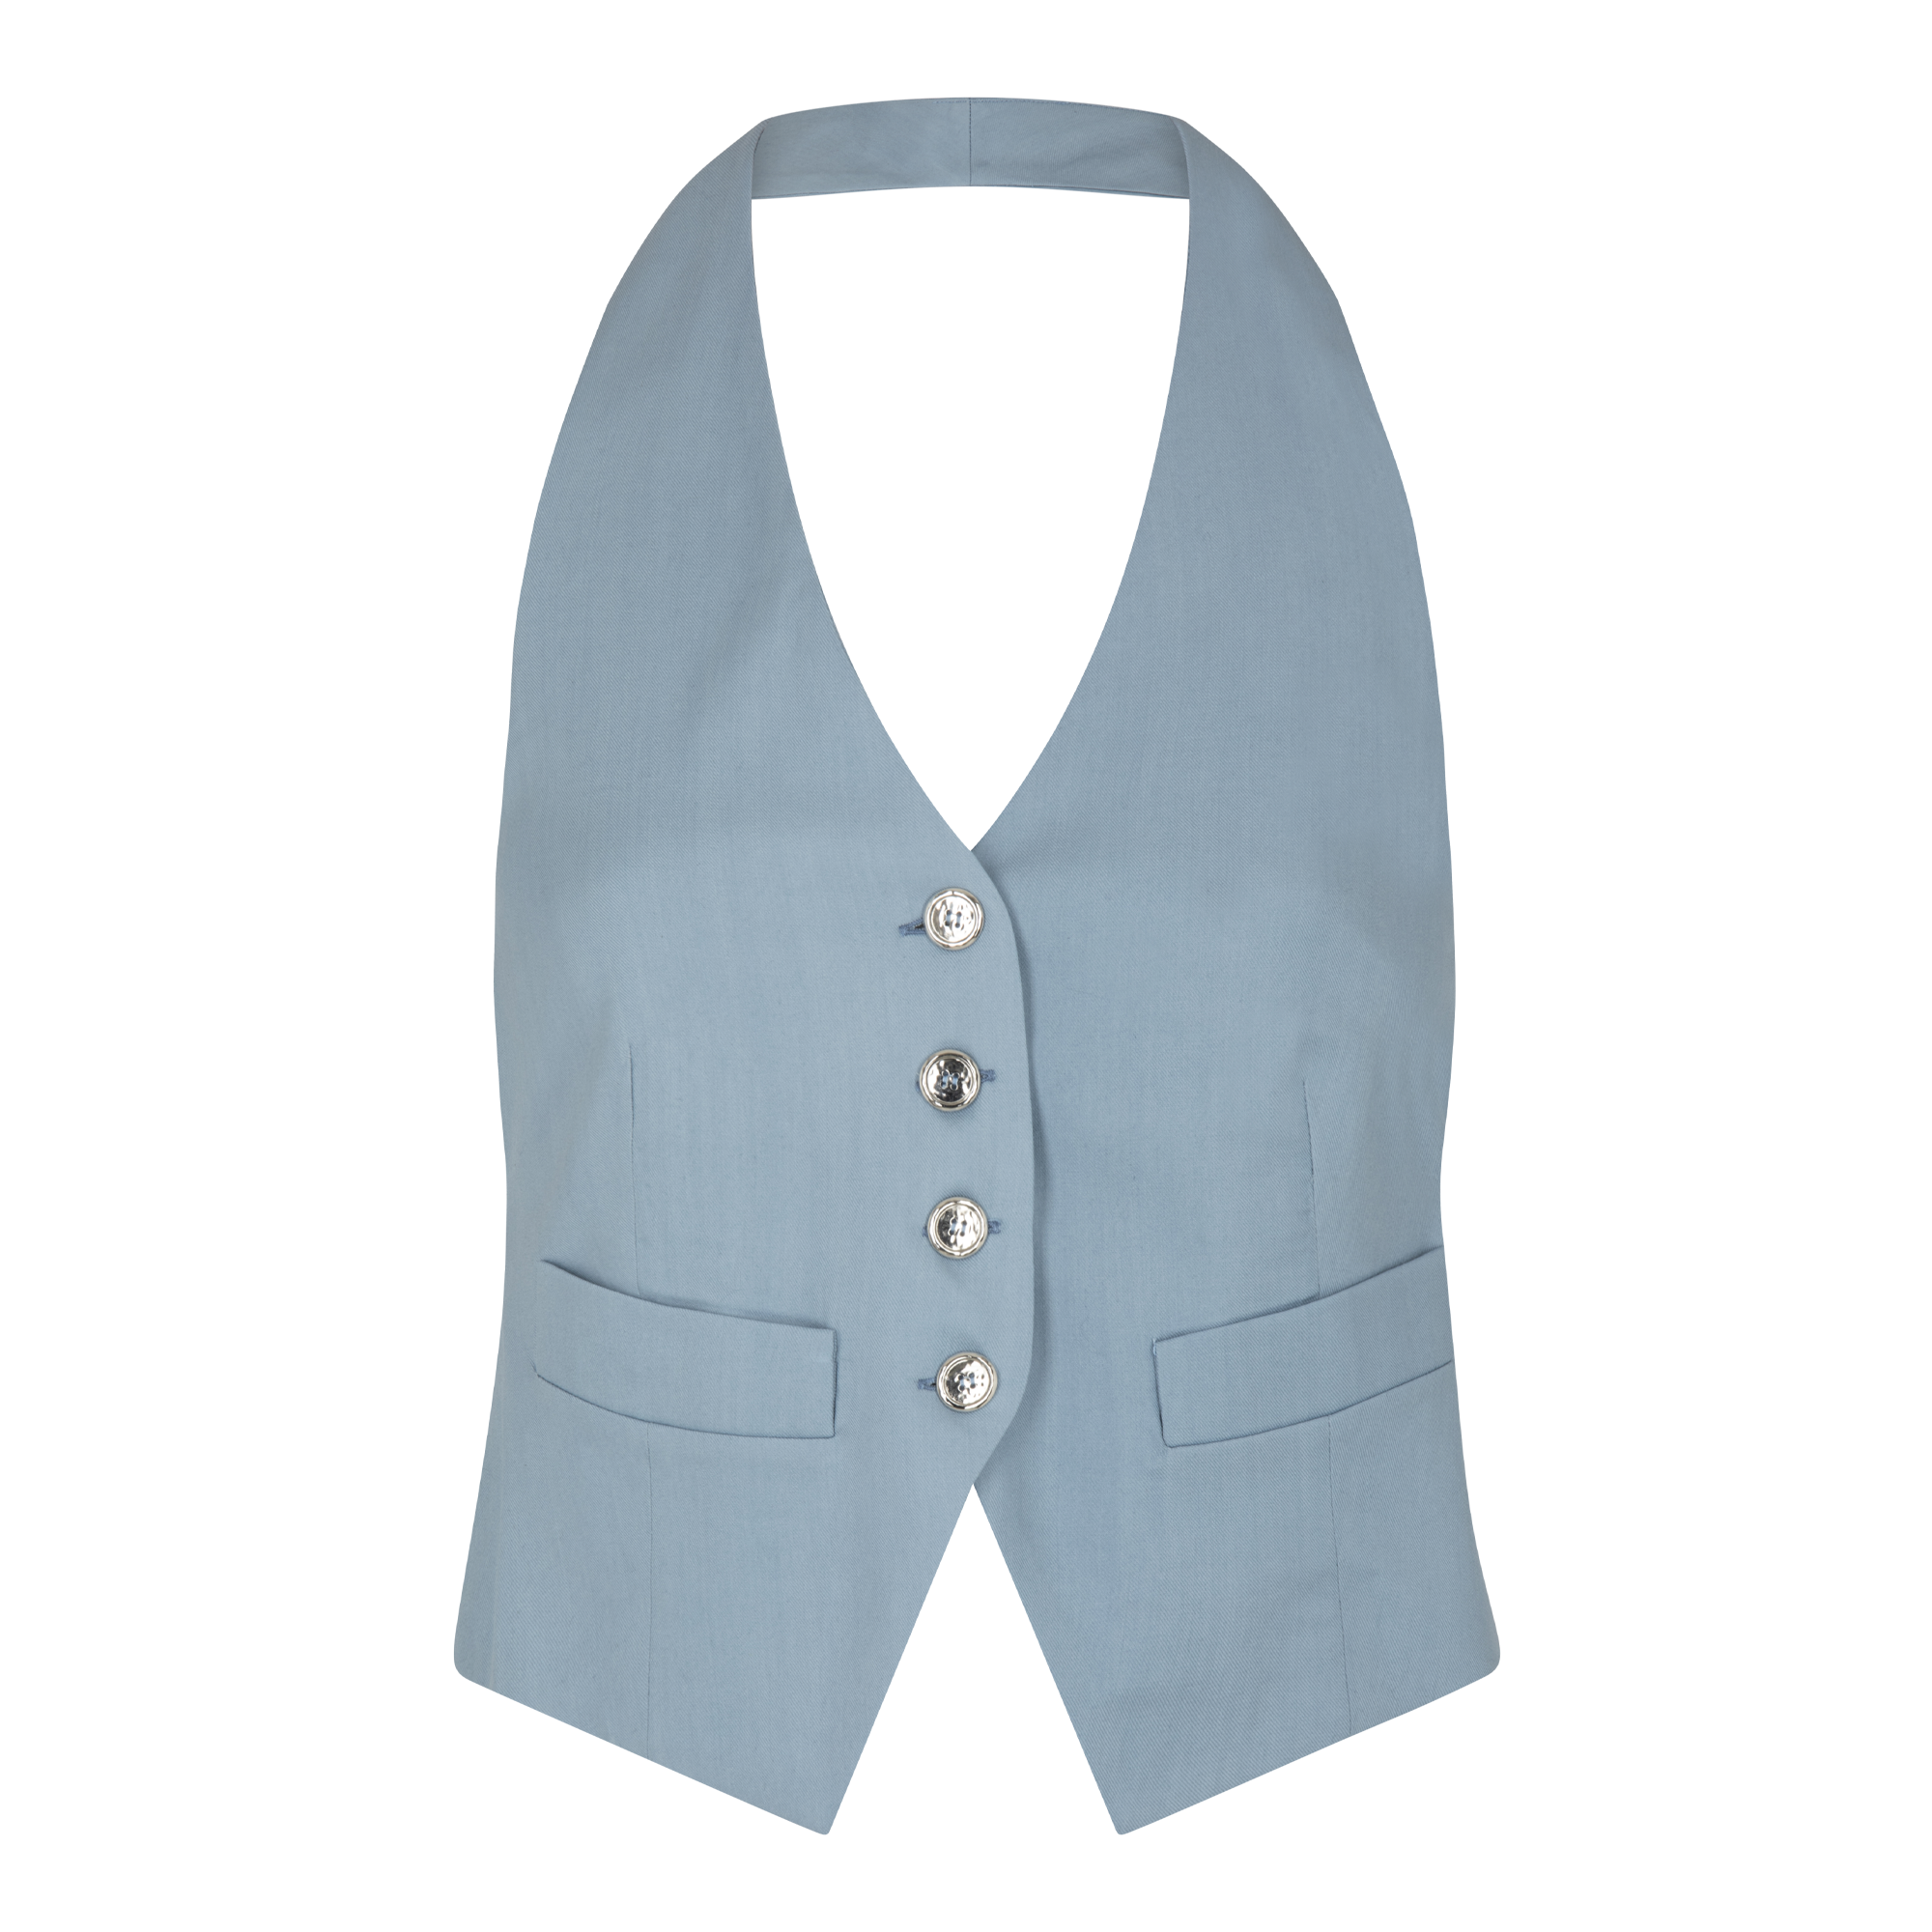 NORA BACKLESS BLUE FLANELLE